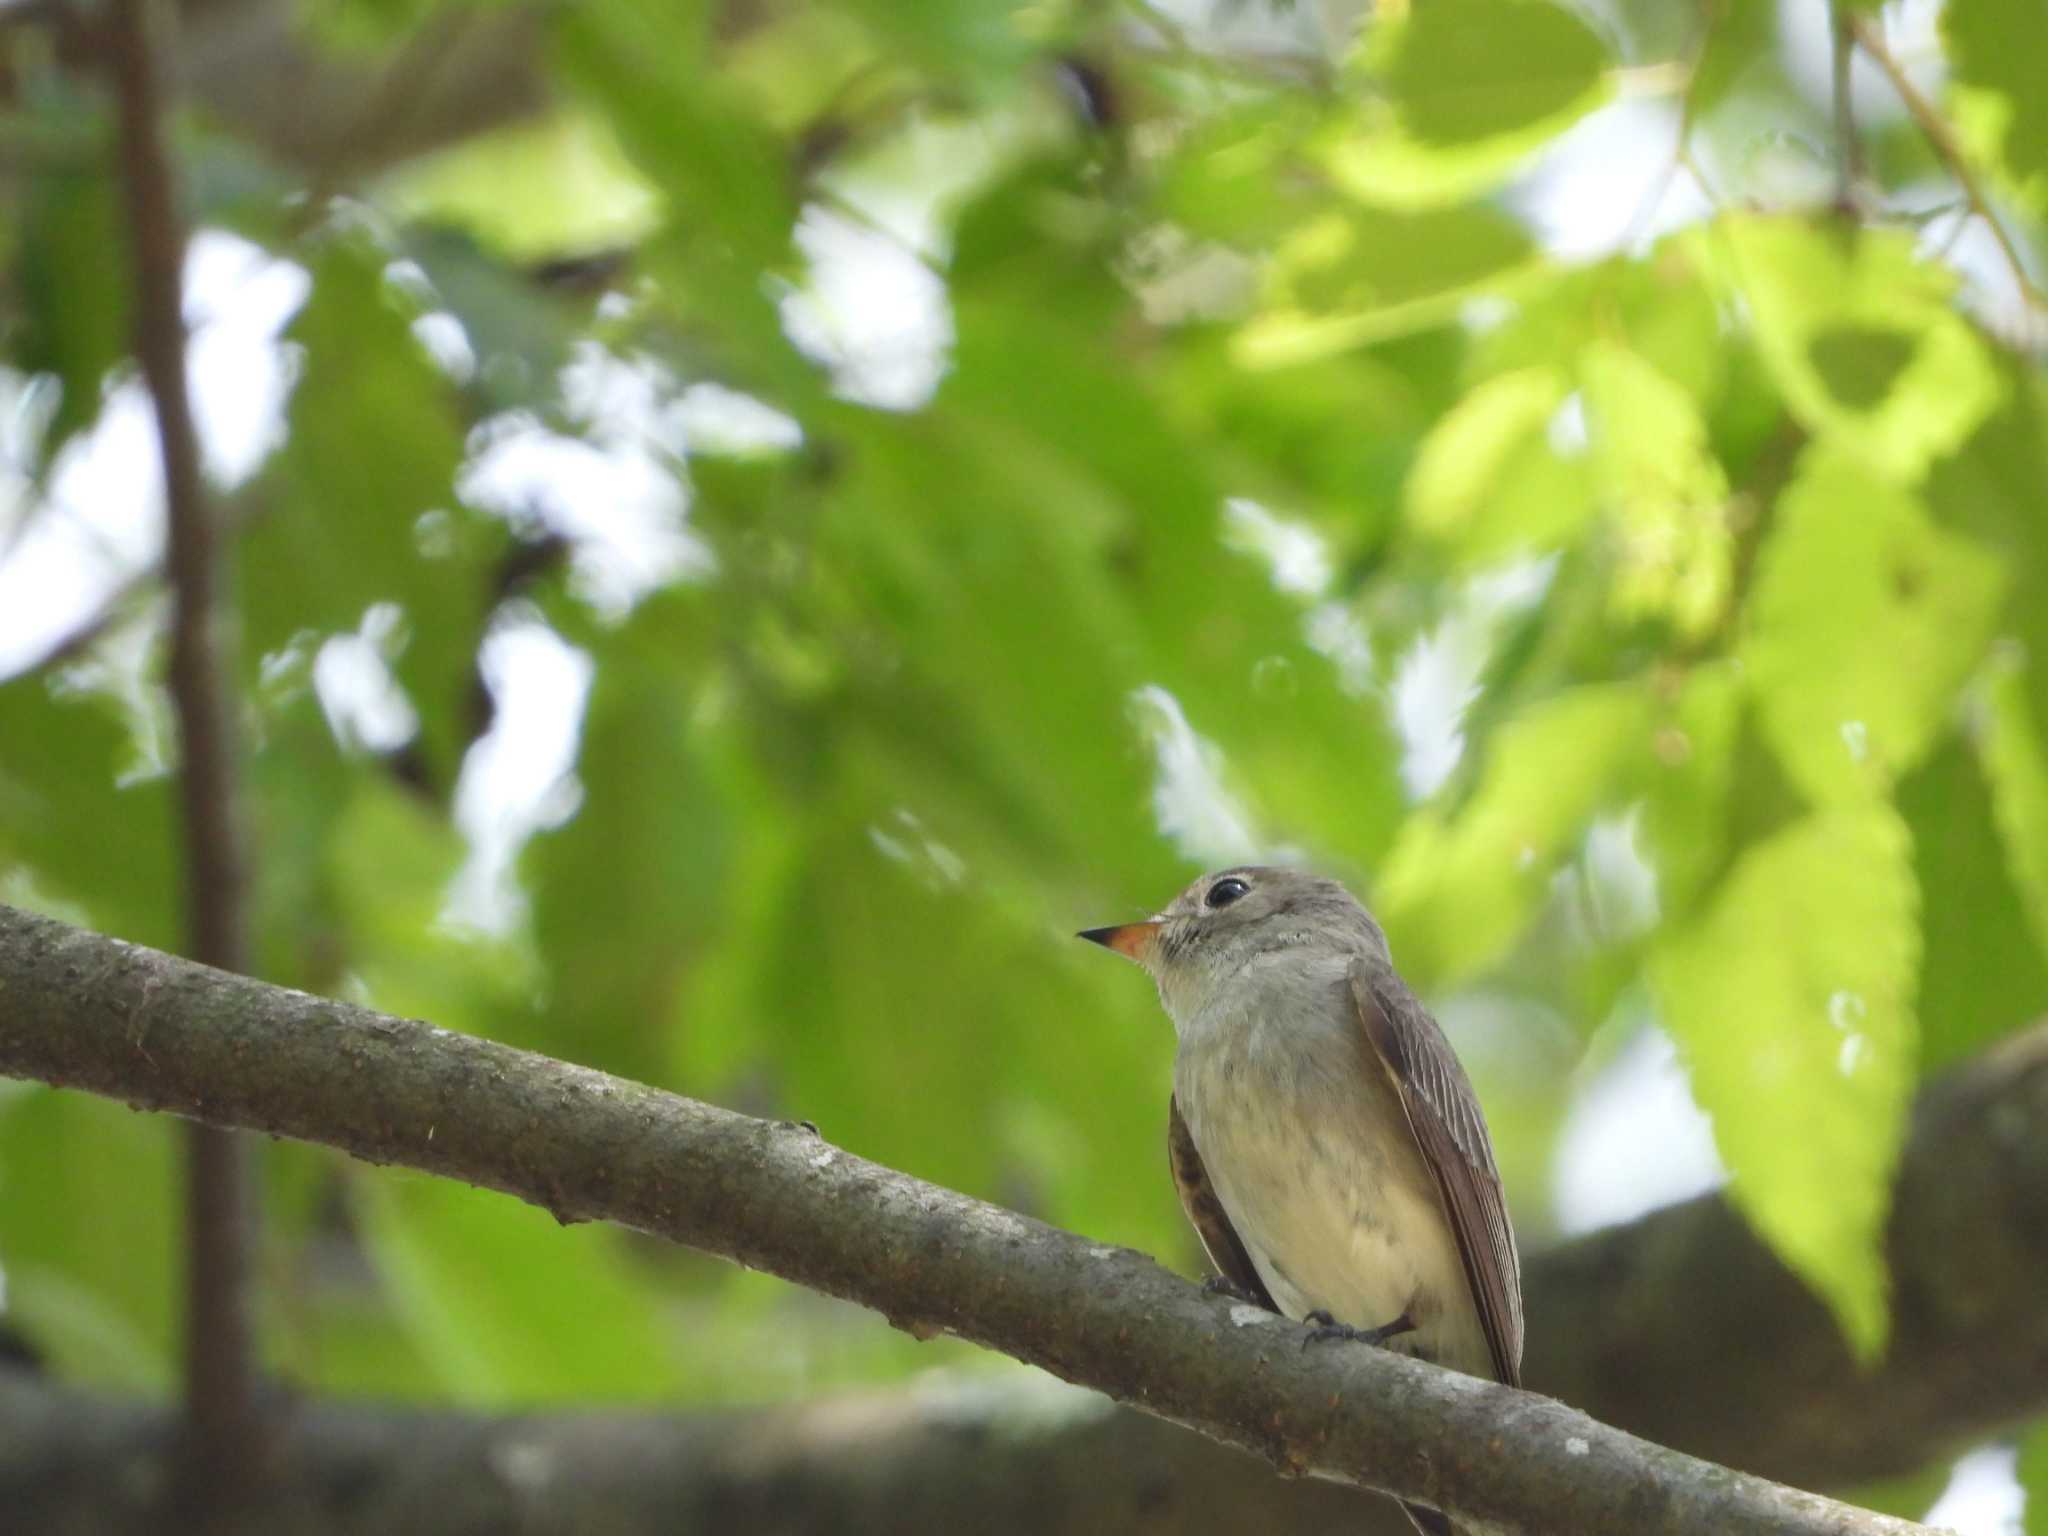 Photo of Asian Brown Flycatcher at 八王子 by サジタリウスの眼